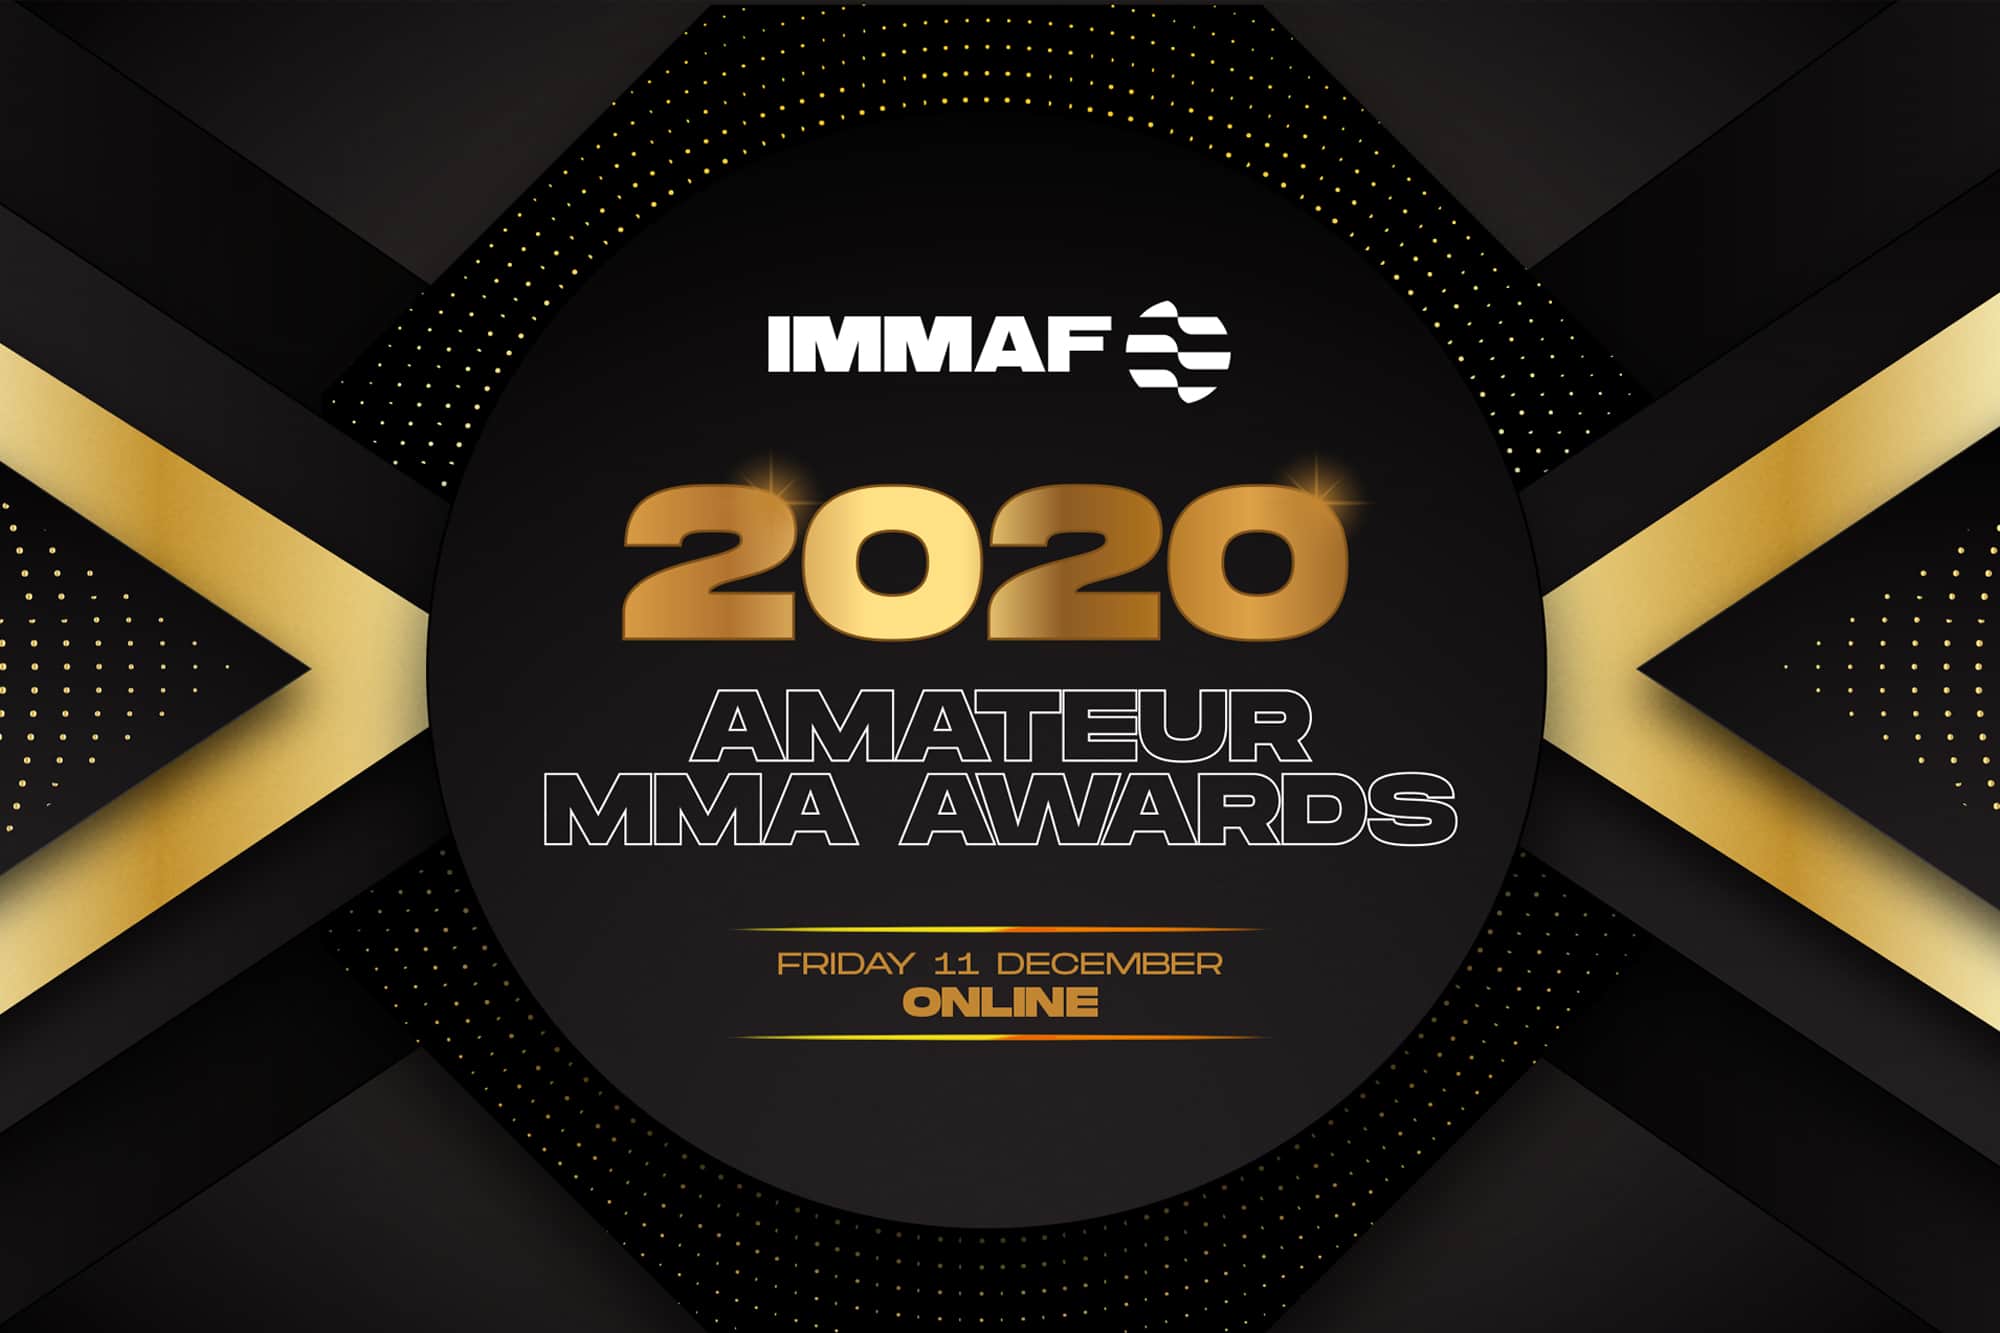 IMMAF counts down to 2020 Amateur MMA Awards